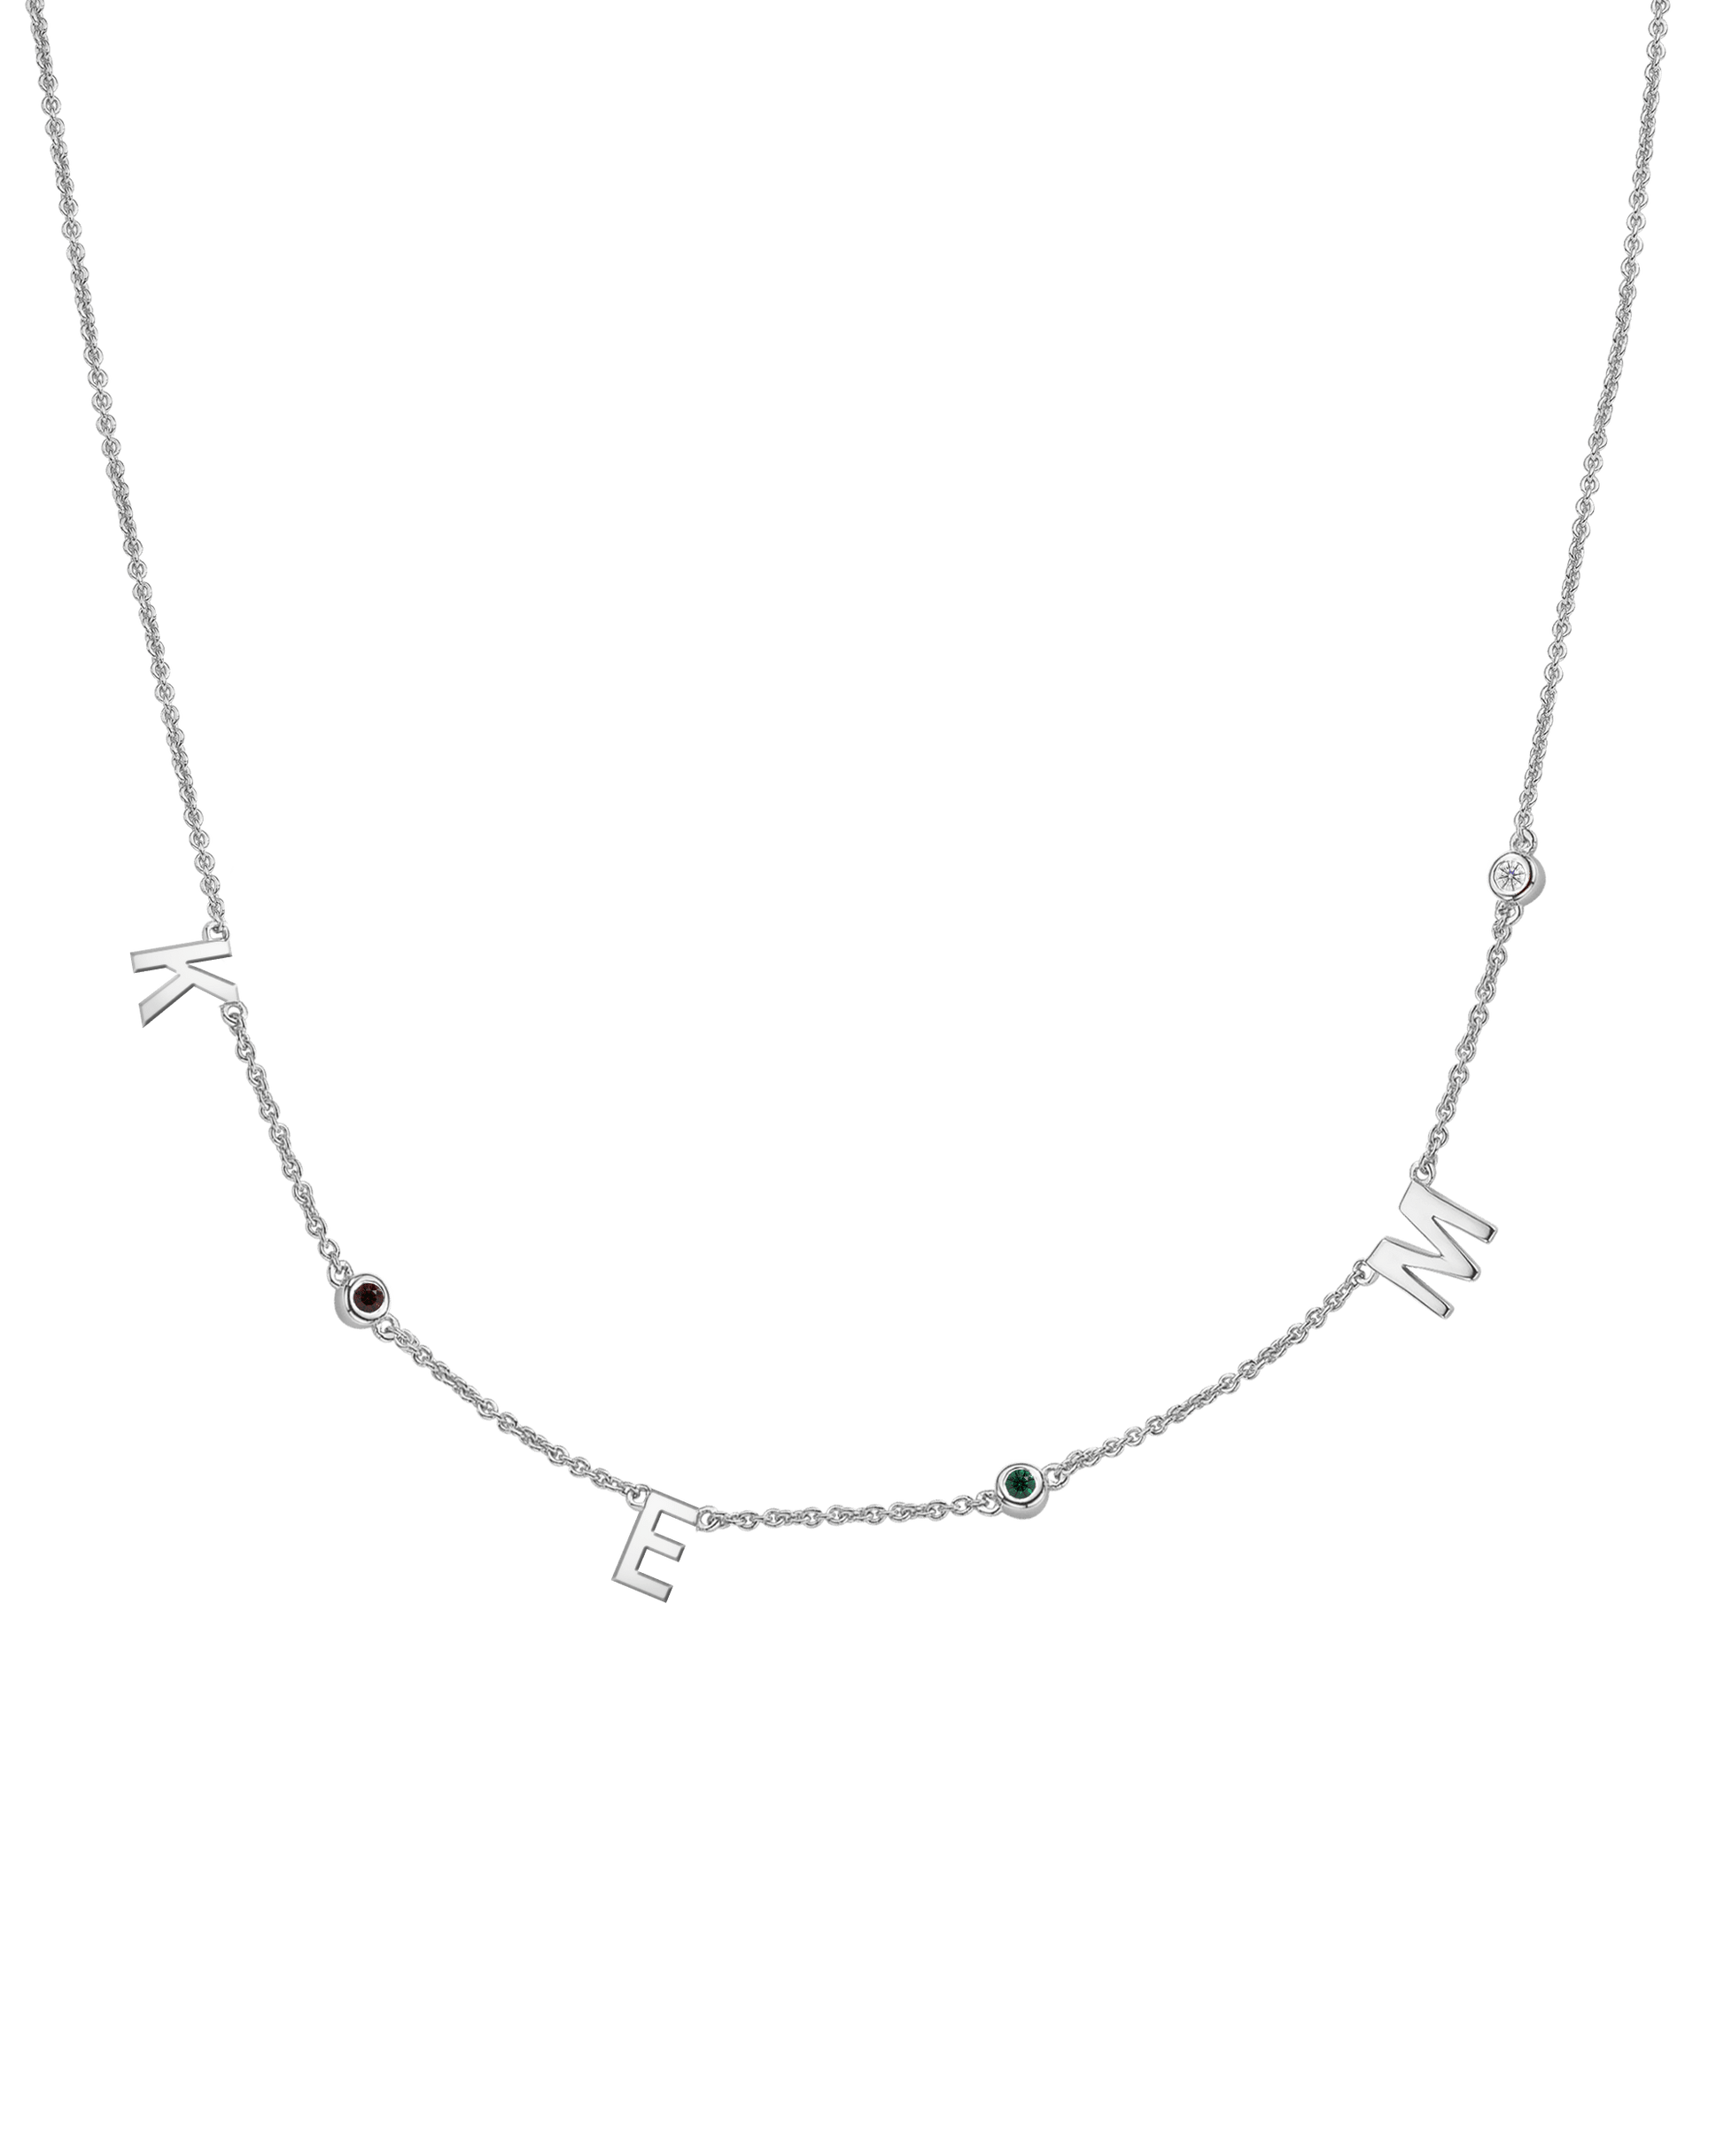 Initial Birthstone Necklace - 14K White Gold Necklaces magal-dev 3 Initials + 3 Birthstones Adjustable 16-17" (40cm-43cm) 